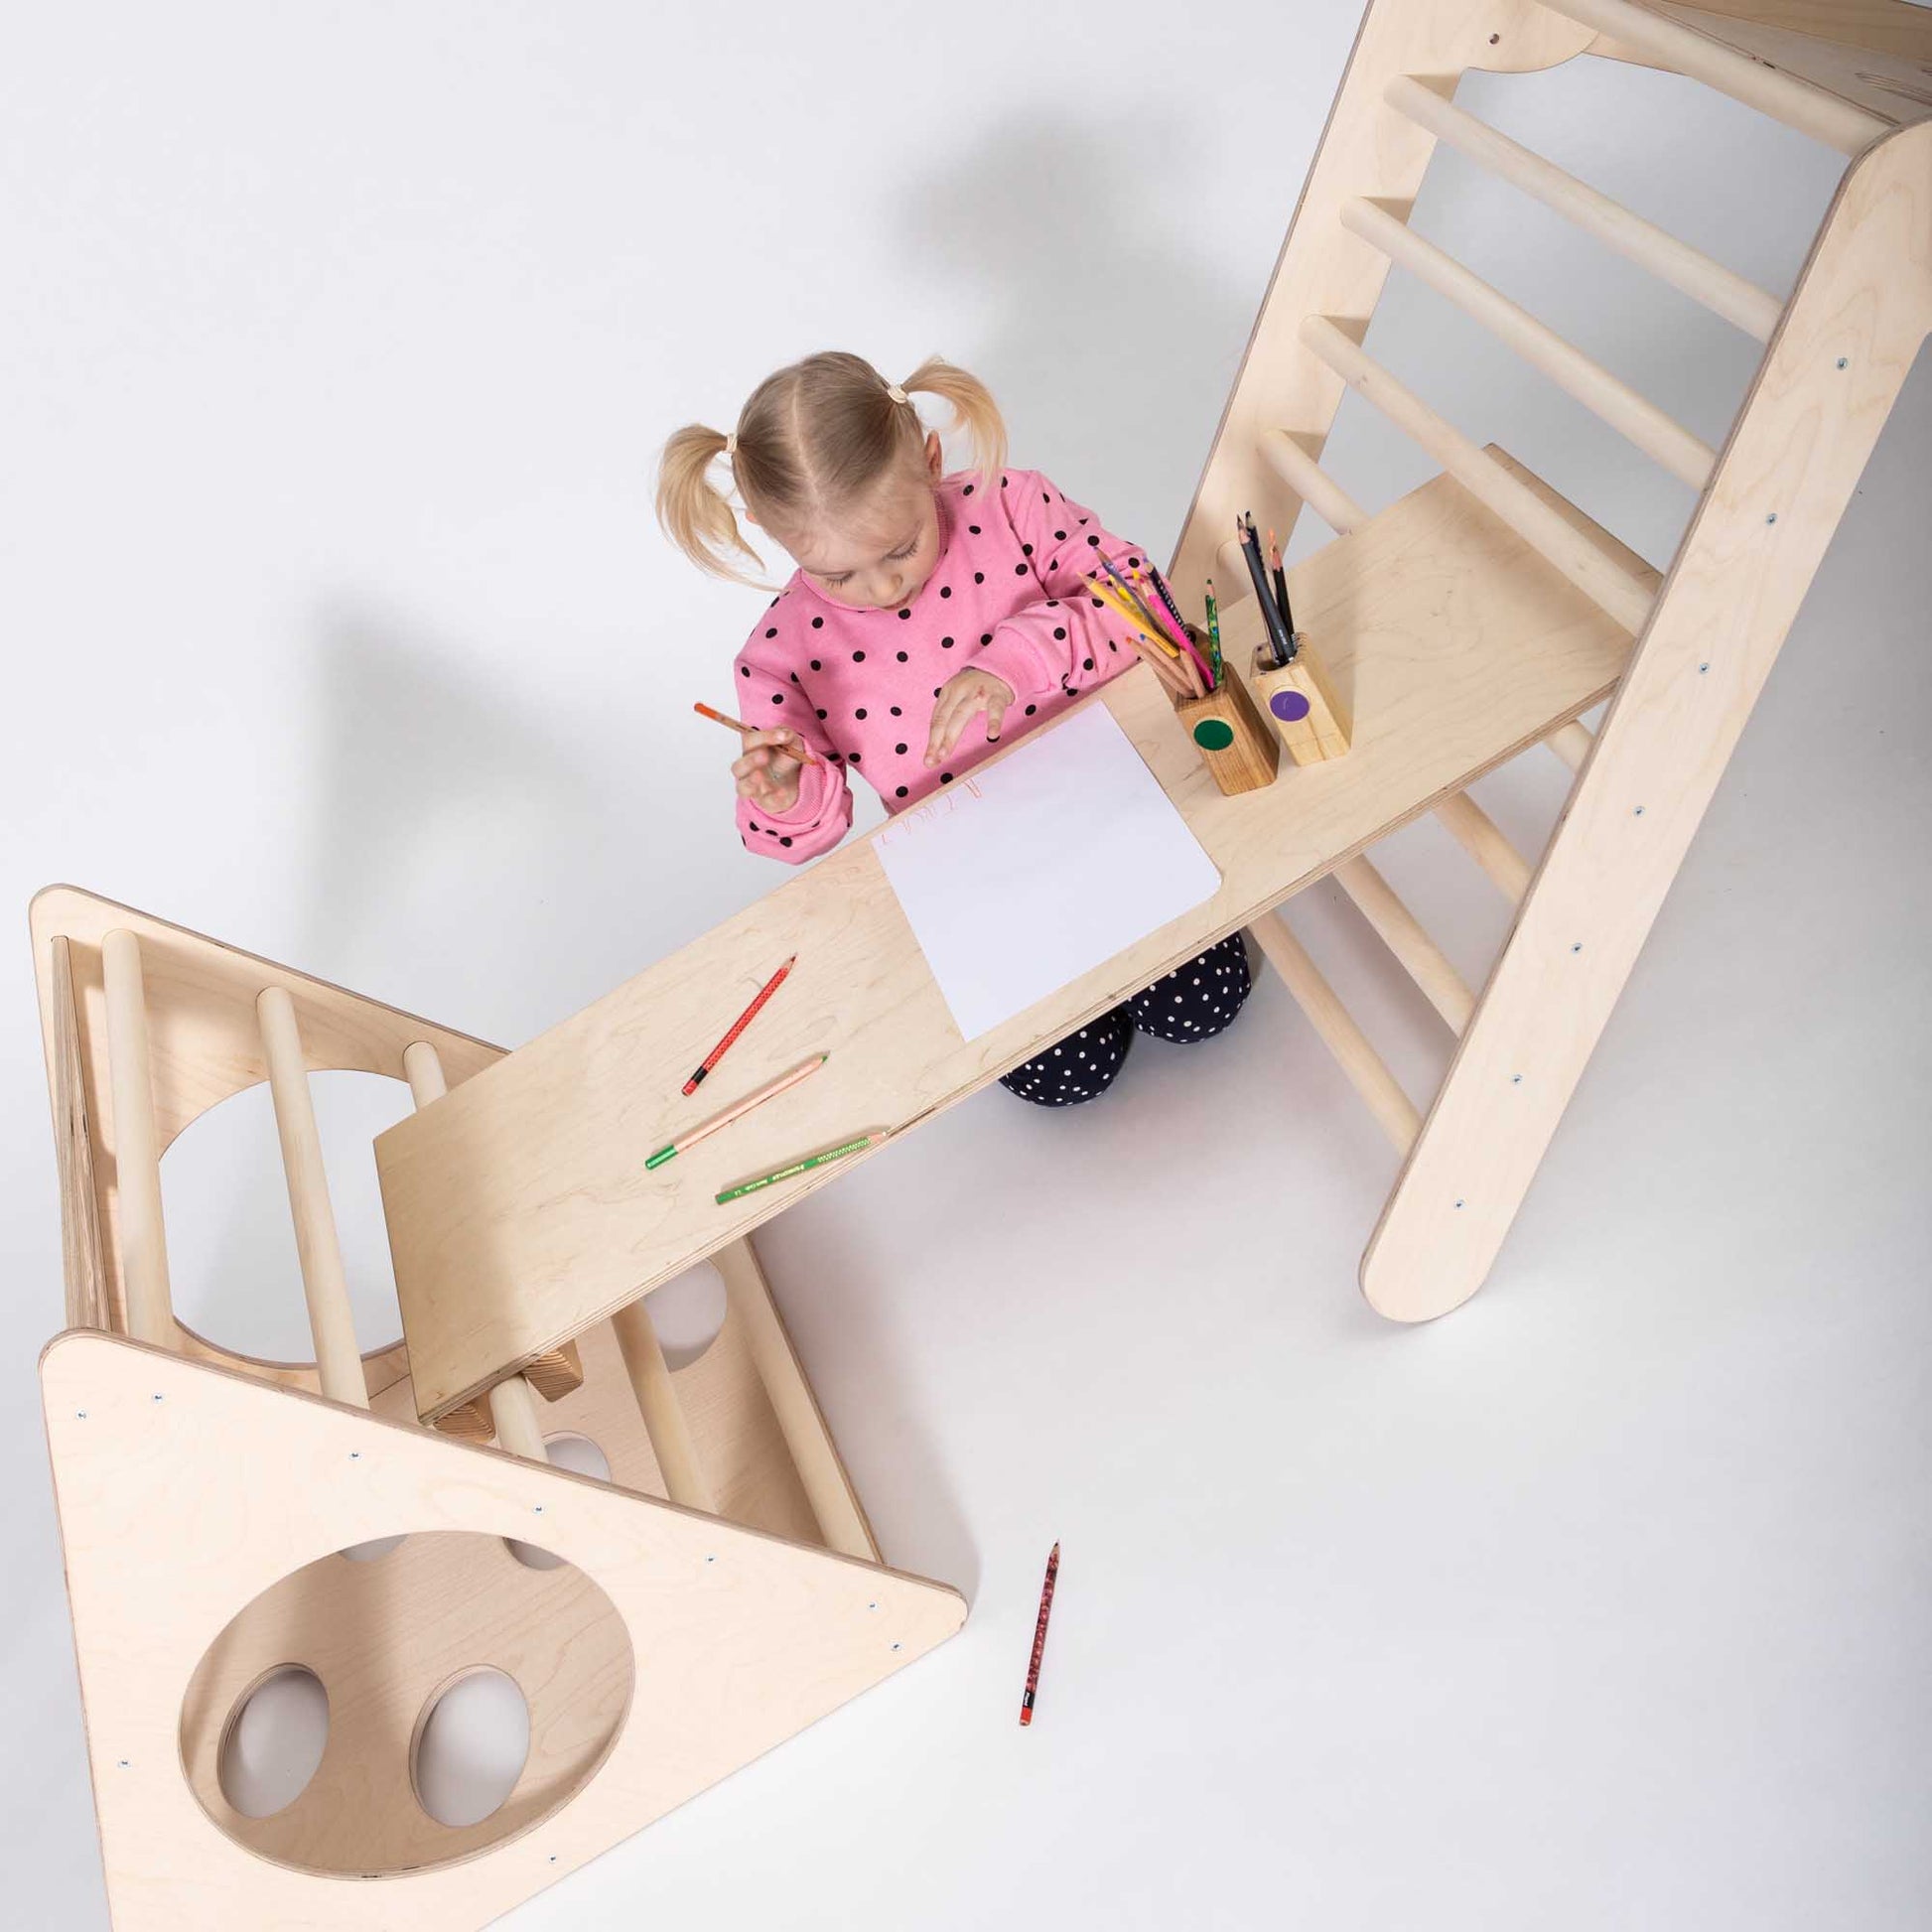 A girl creatively using a climbing triangle ramp as a table for drawing, showcasing the versatility of the structure for alternative activities.